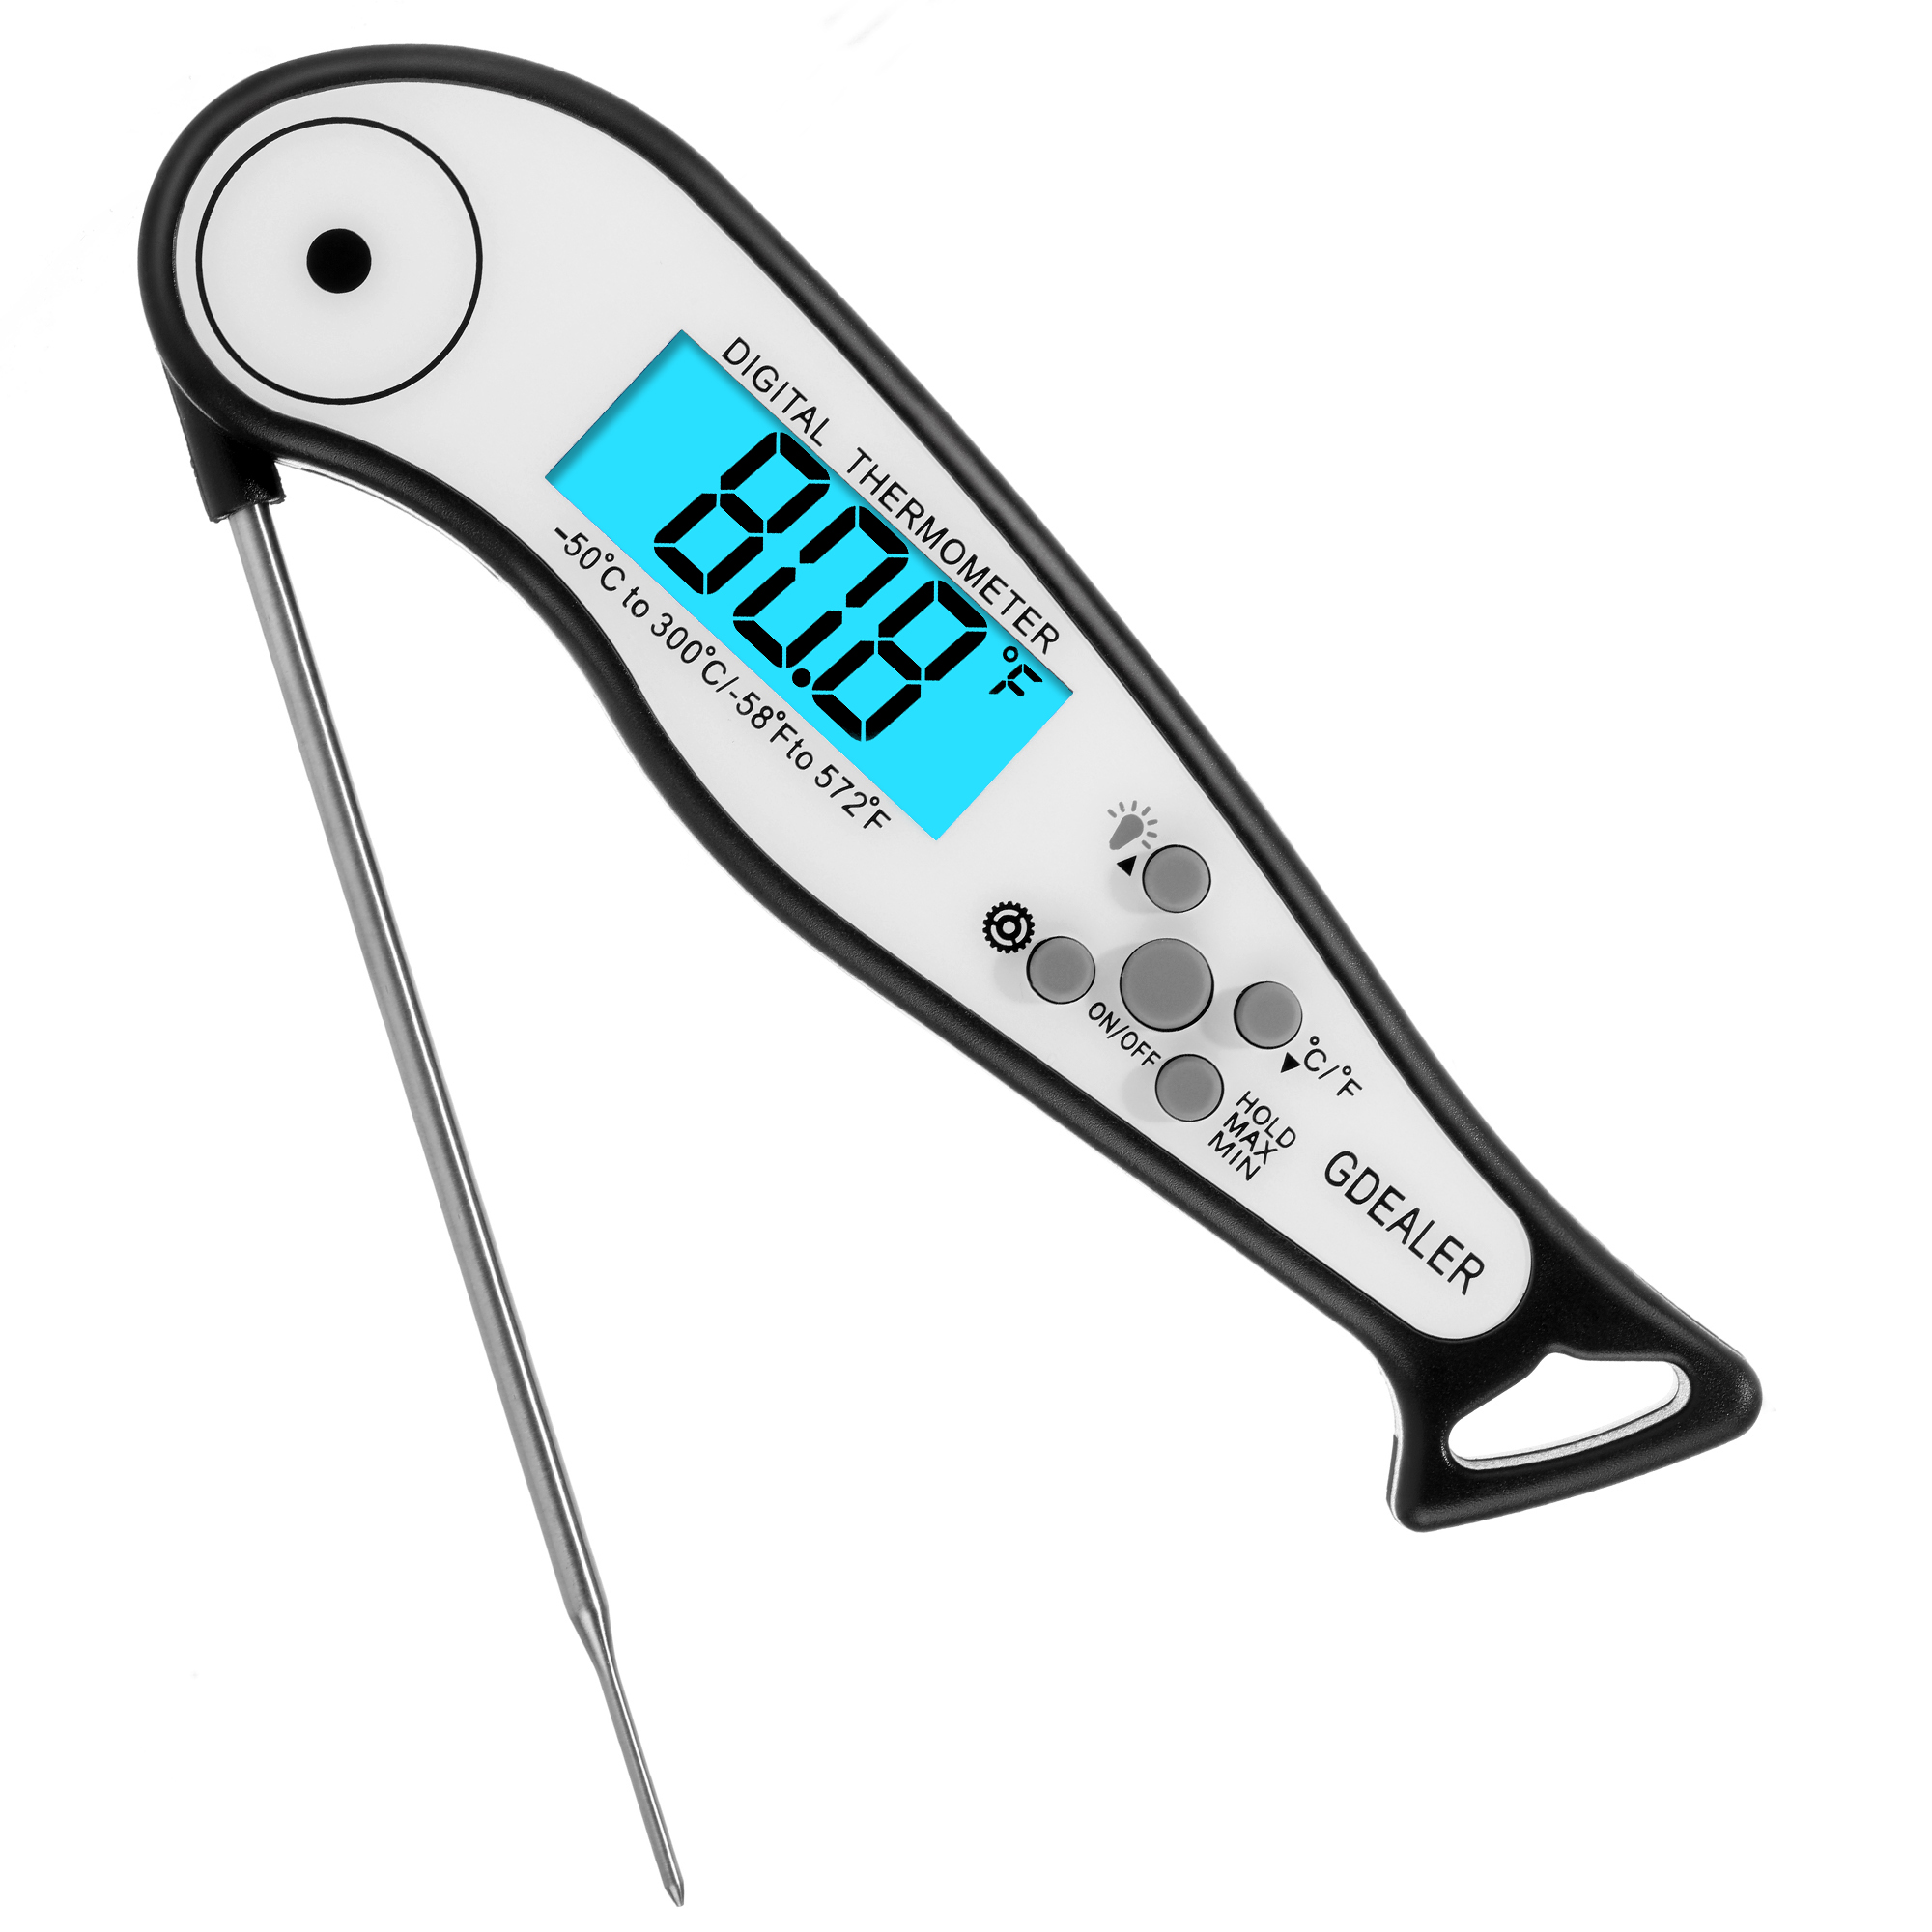 GDEALER Alarm Meat Thermometer Waterproof Super Fast Instant Read Thermometer with Calibration Function Back-lit Digital BBQ thermometer Kitchen Cook Thermometer for Grill Smoker Food,Candy,Milk by GDEALER